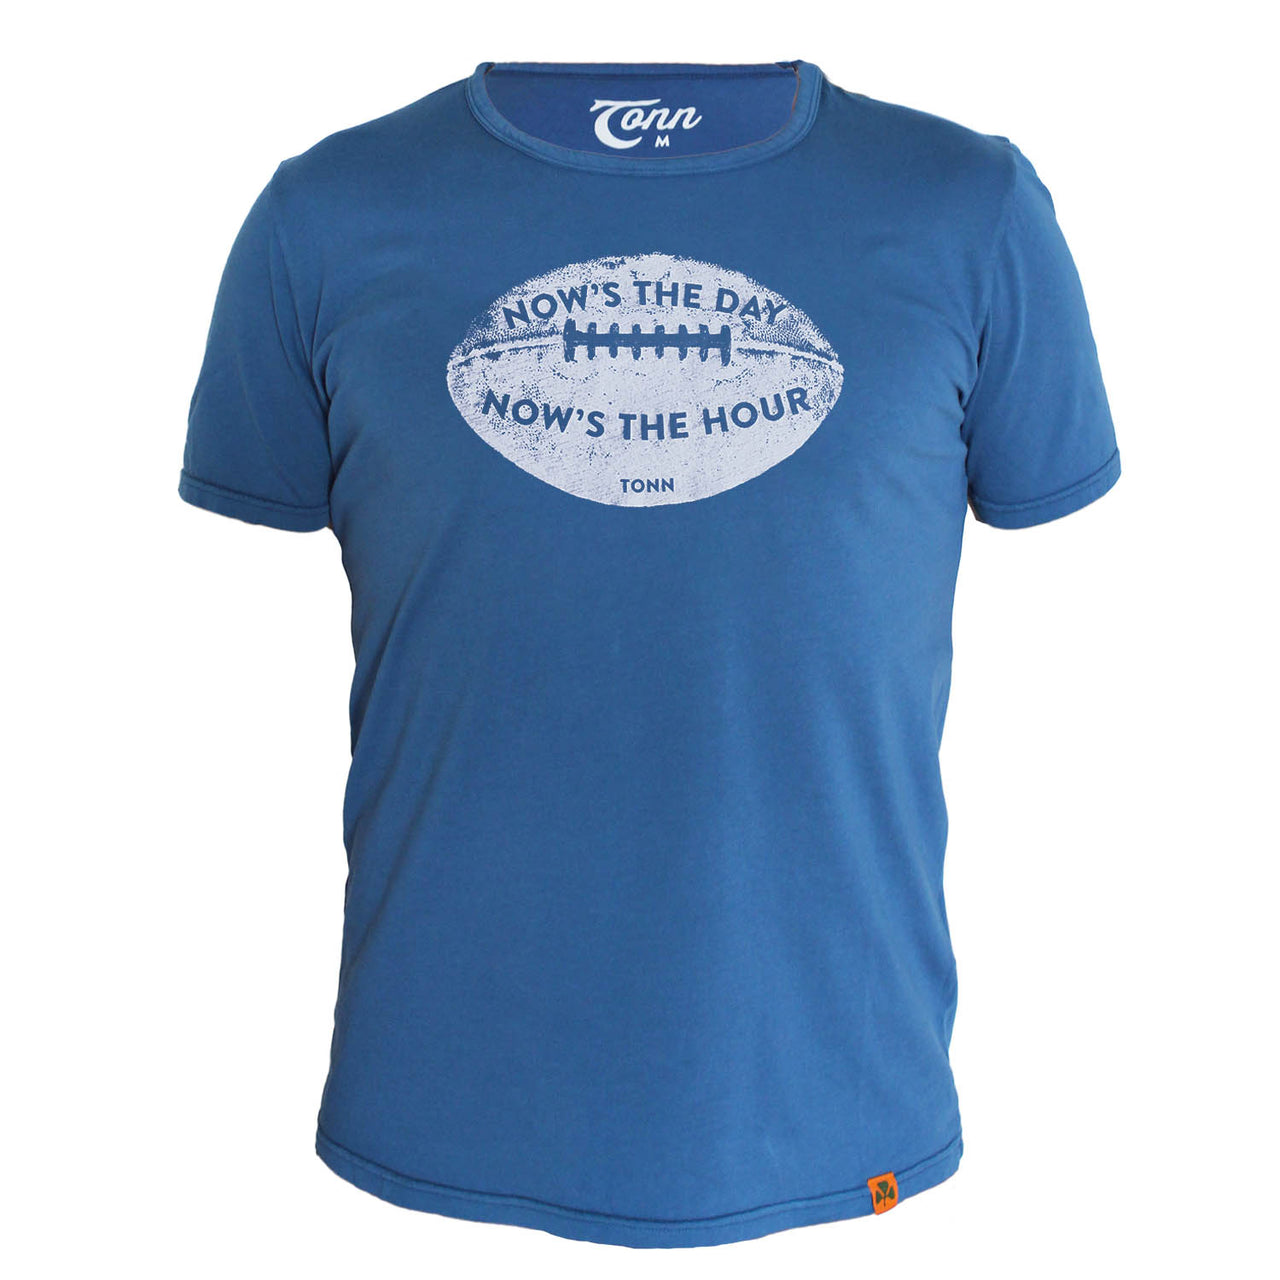 Now's the Day Rugby Crew Neck Tee Dark Blue